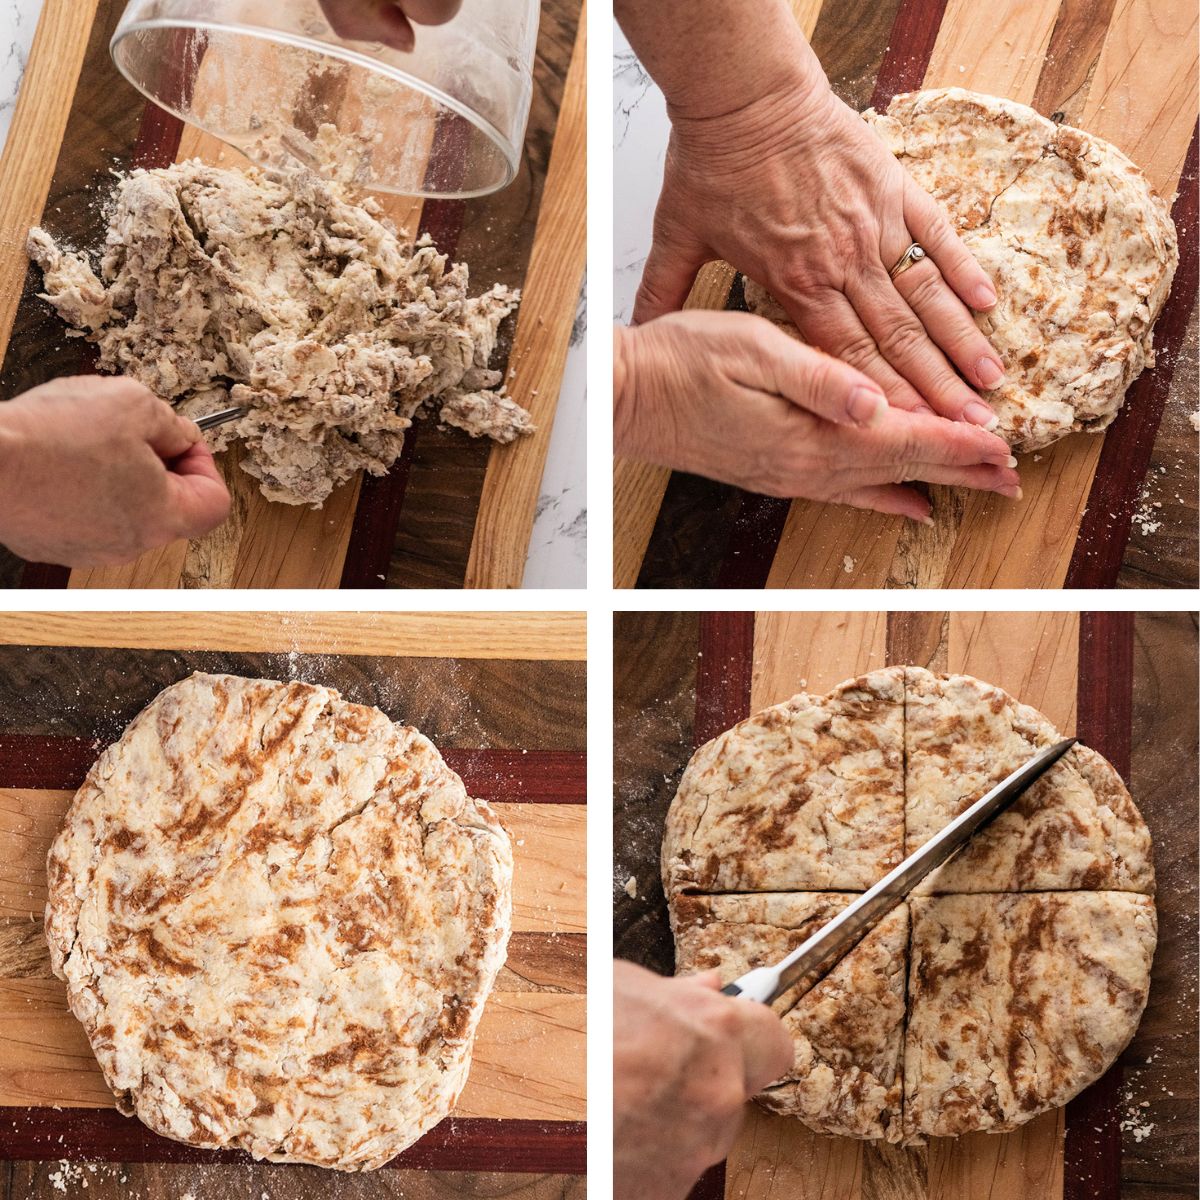 Woman's hands patting scone dough into a circle on a wood cutting board.